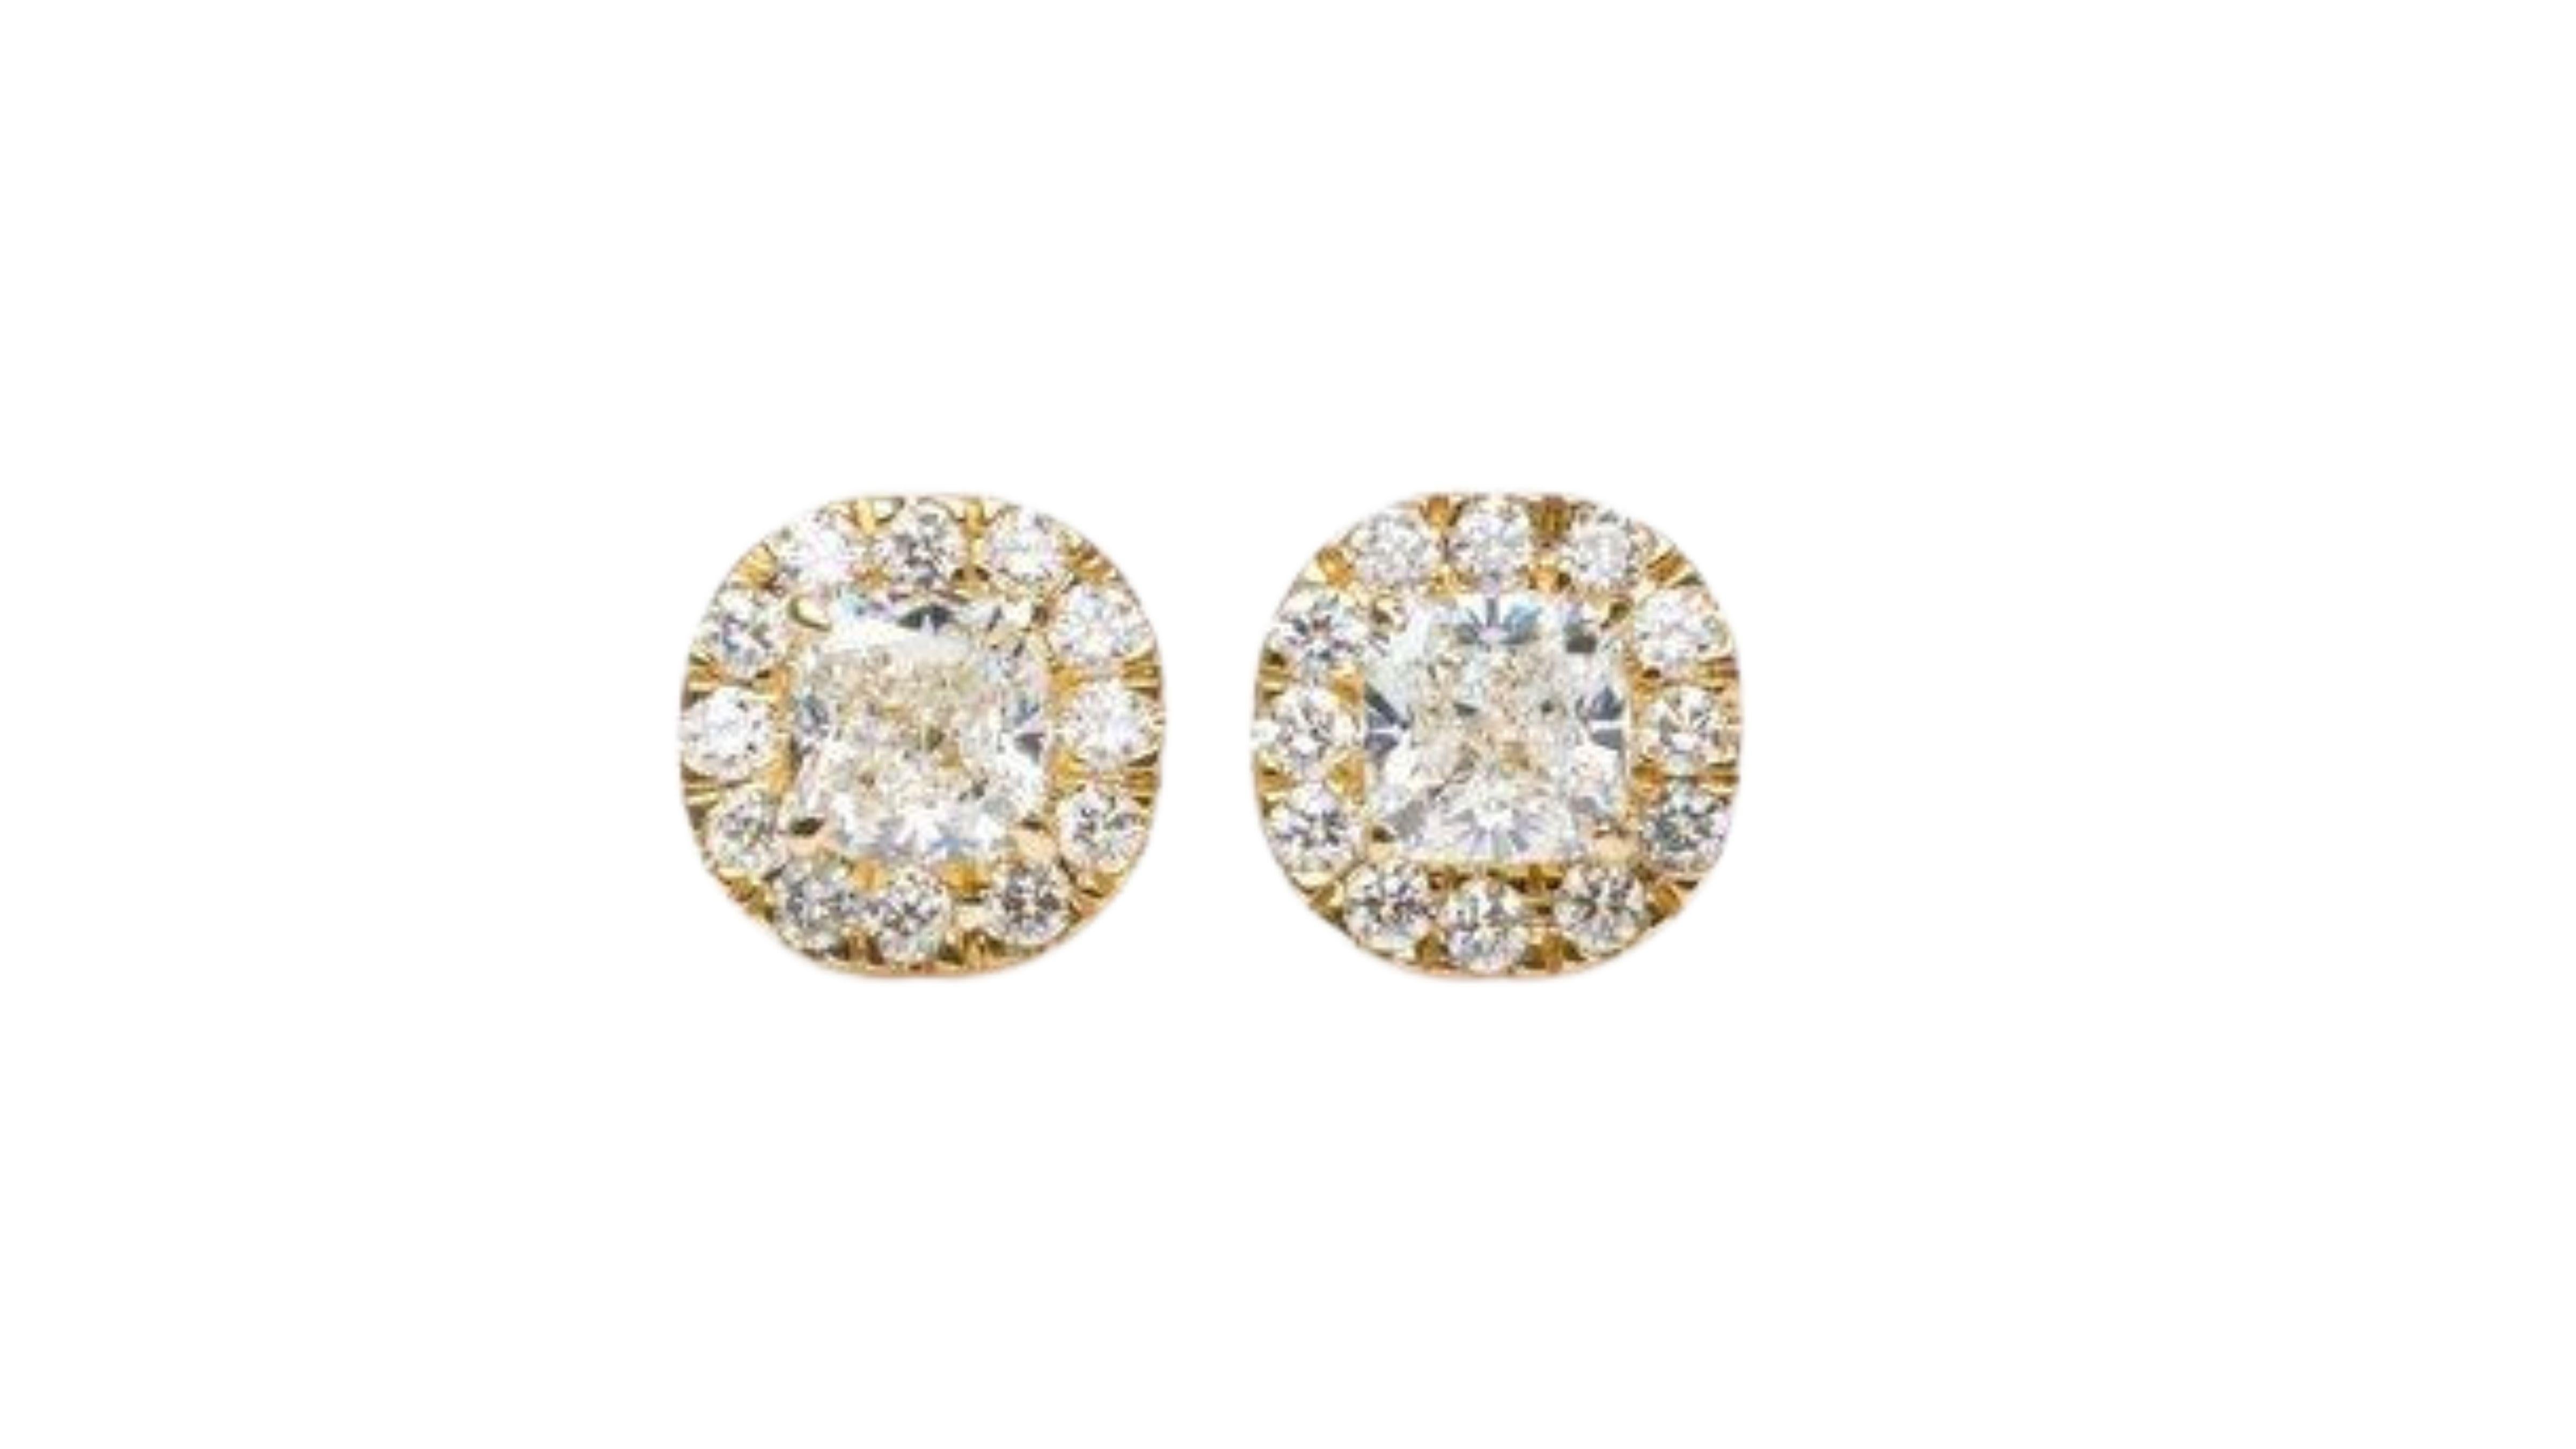 Sparkling 18k Yellow Gold Stud Earrings with 1.27 Ct Natural Diamonds, Aig Cert For Sale 1